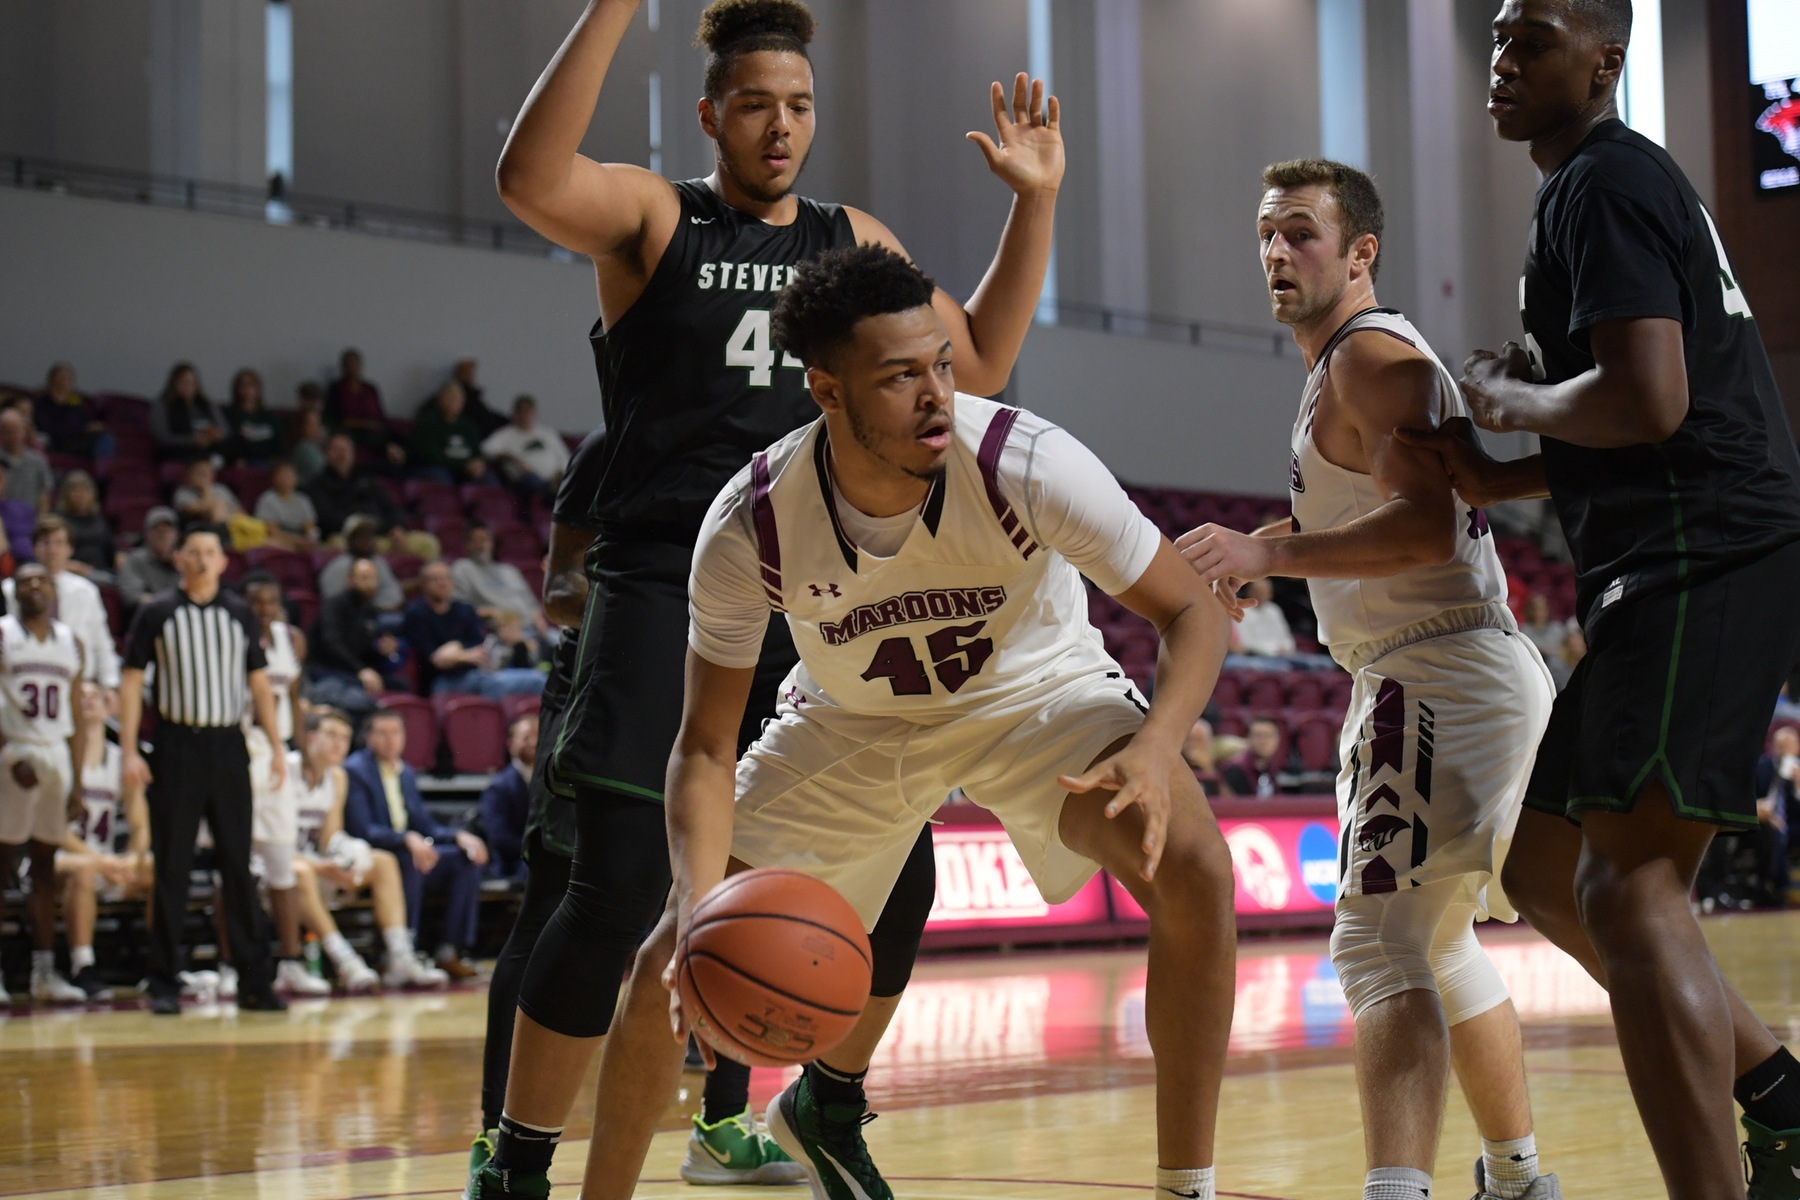 Ethan Rohan grabbed a game-high 12 rebounds in Roanoke's 63-60 overtime win.